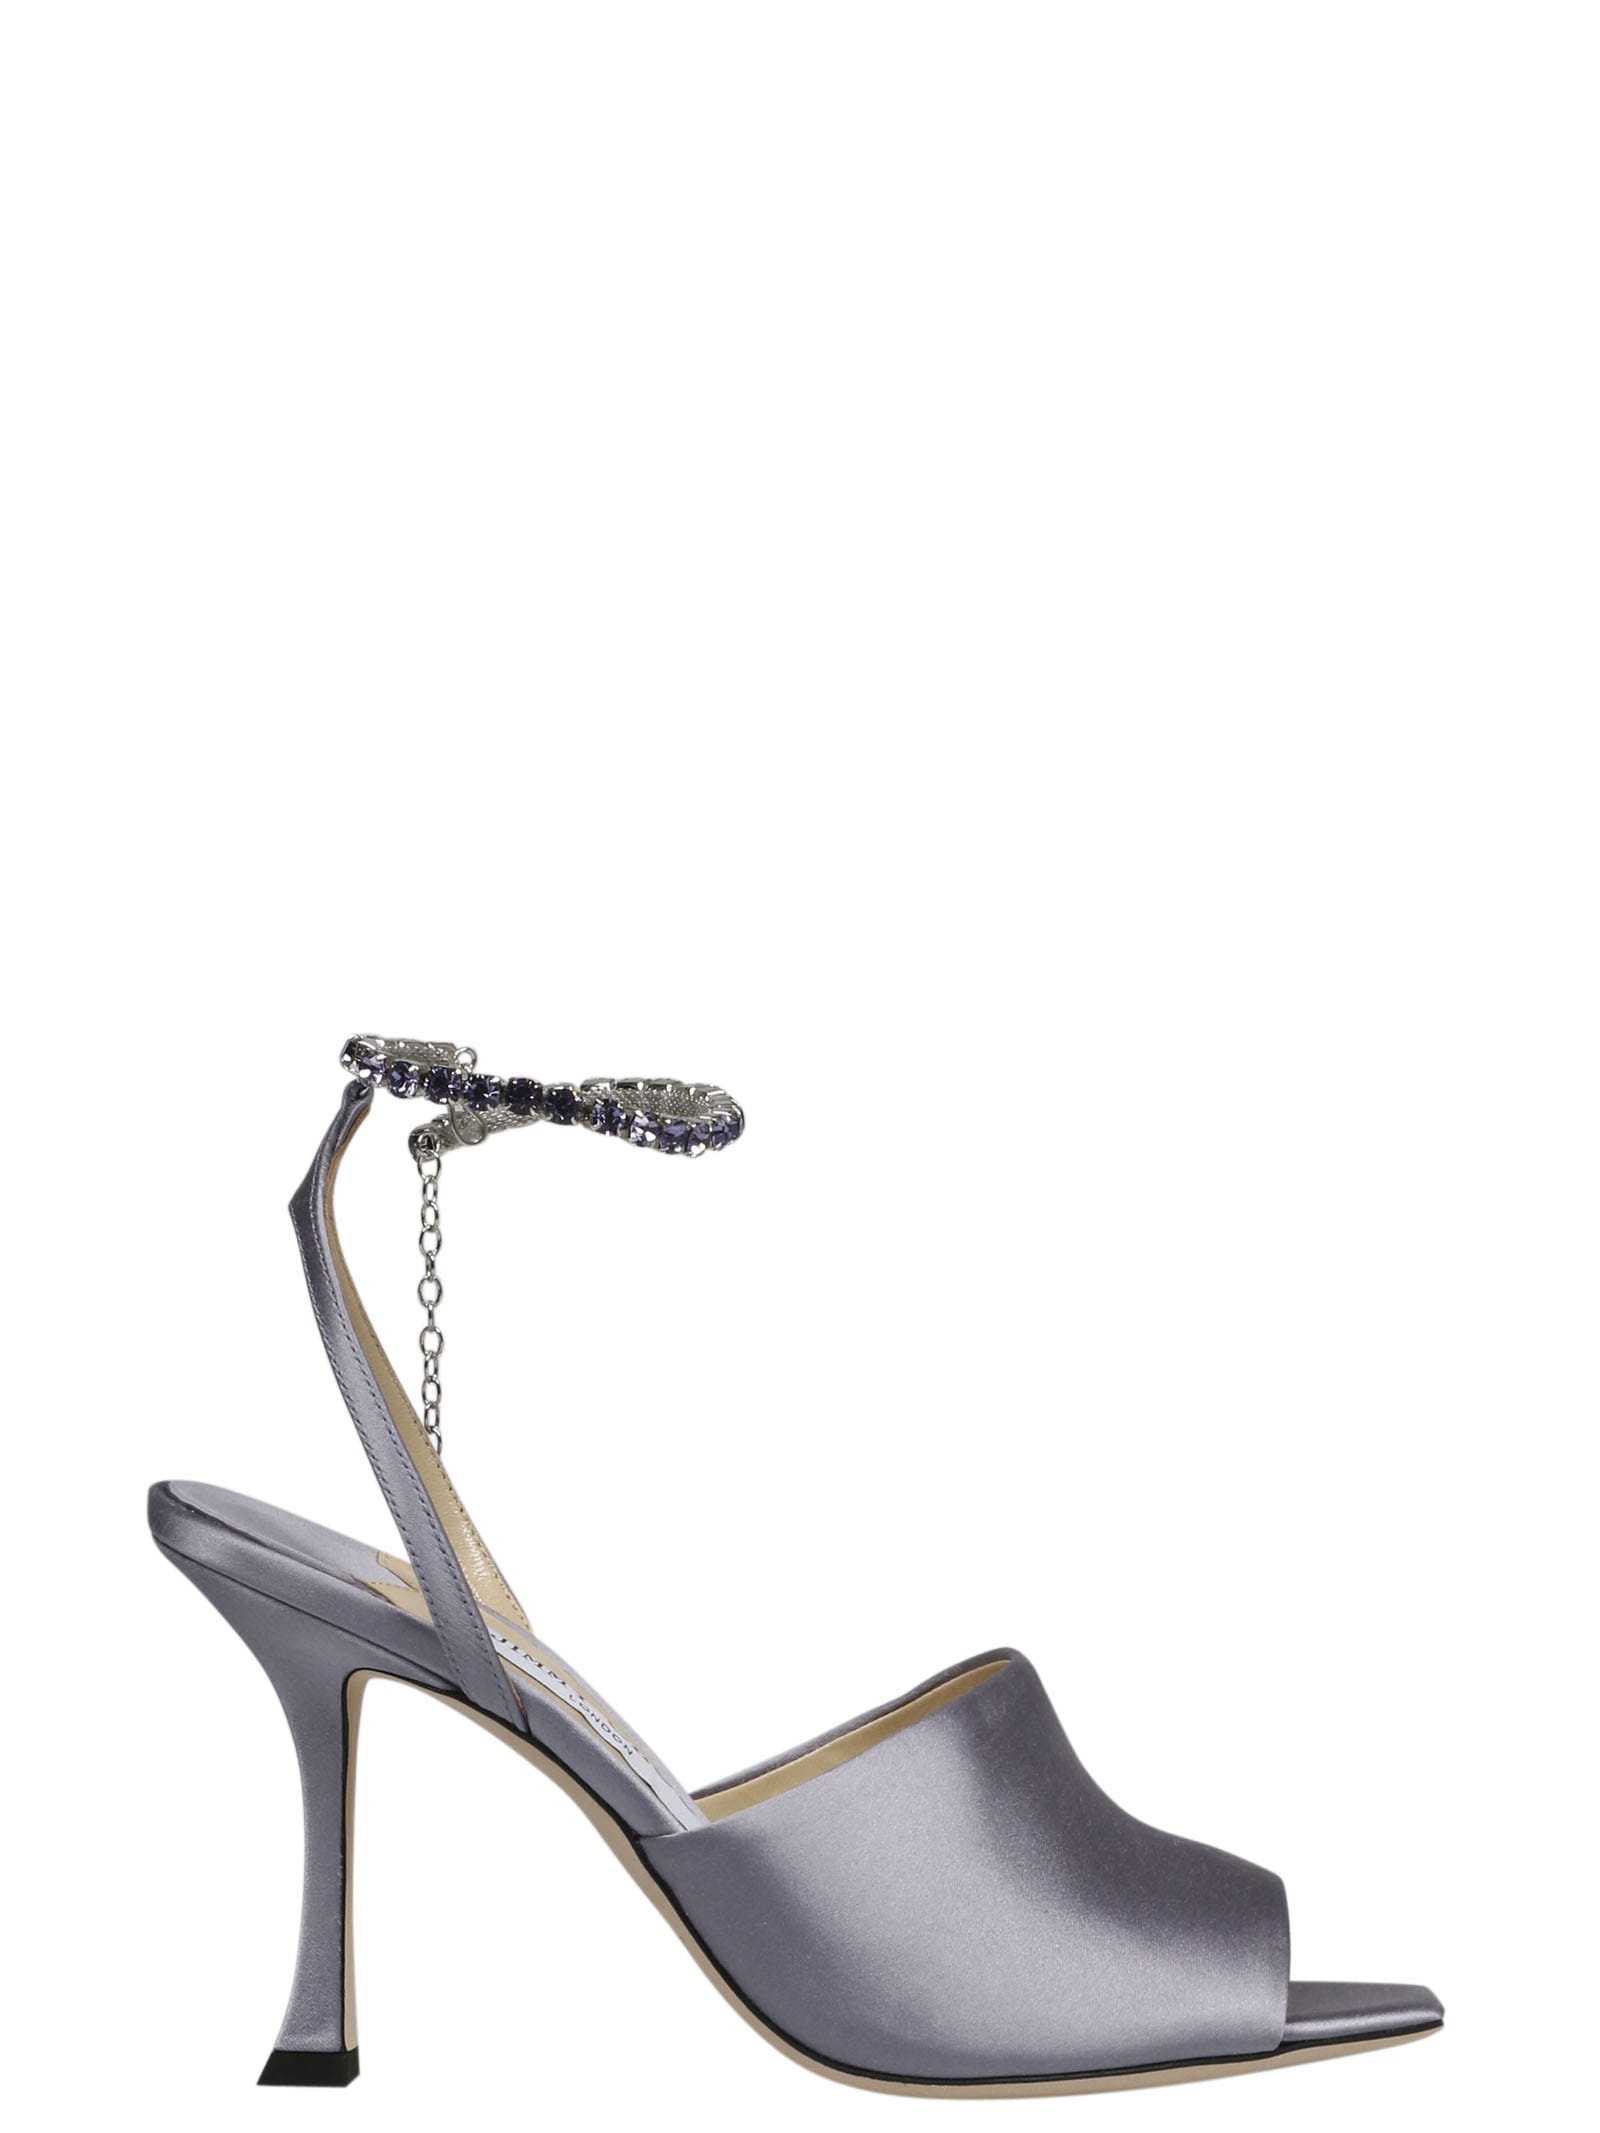 Buy Jimmy Choo Sea Satin Sandals online, shop Jimmy Choo shoes with free shipping